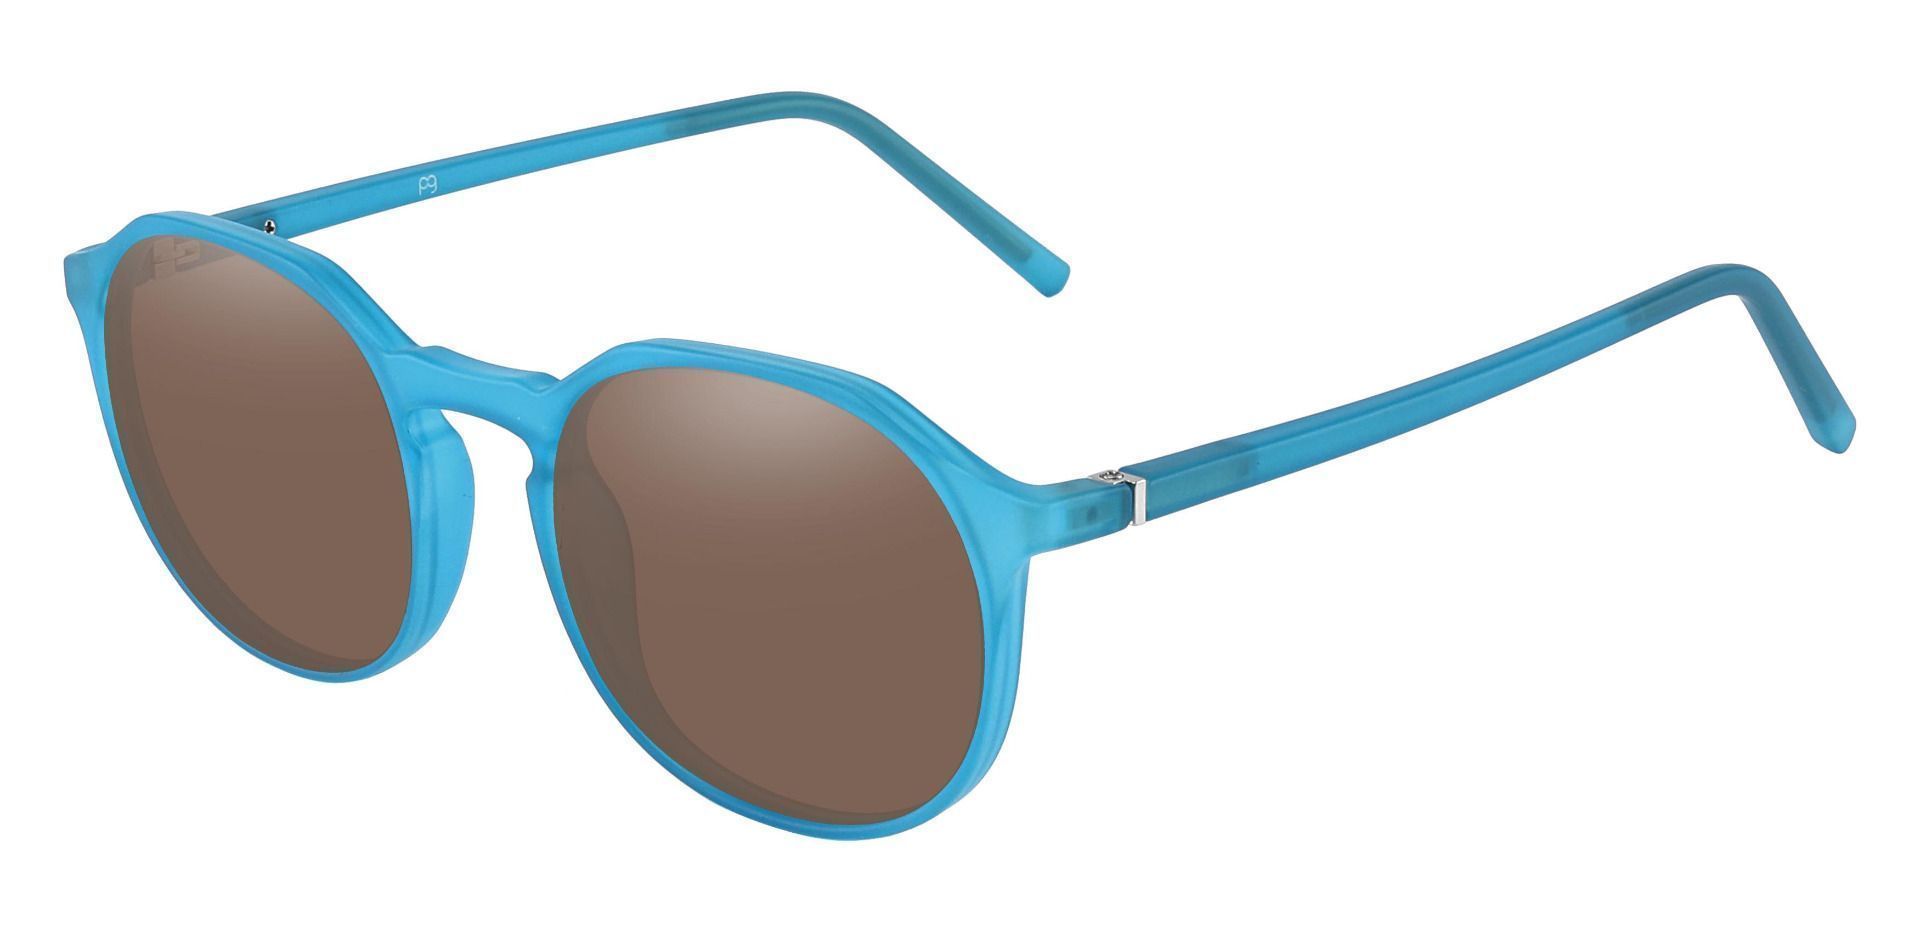 Belvidere Geometric Non-Rx Sunglasses - Blue Frame With Brown Lenses